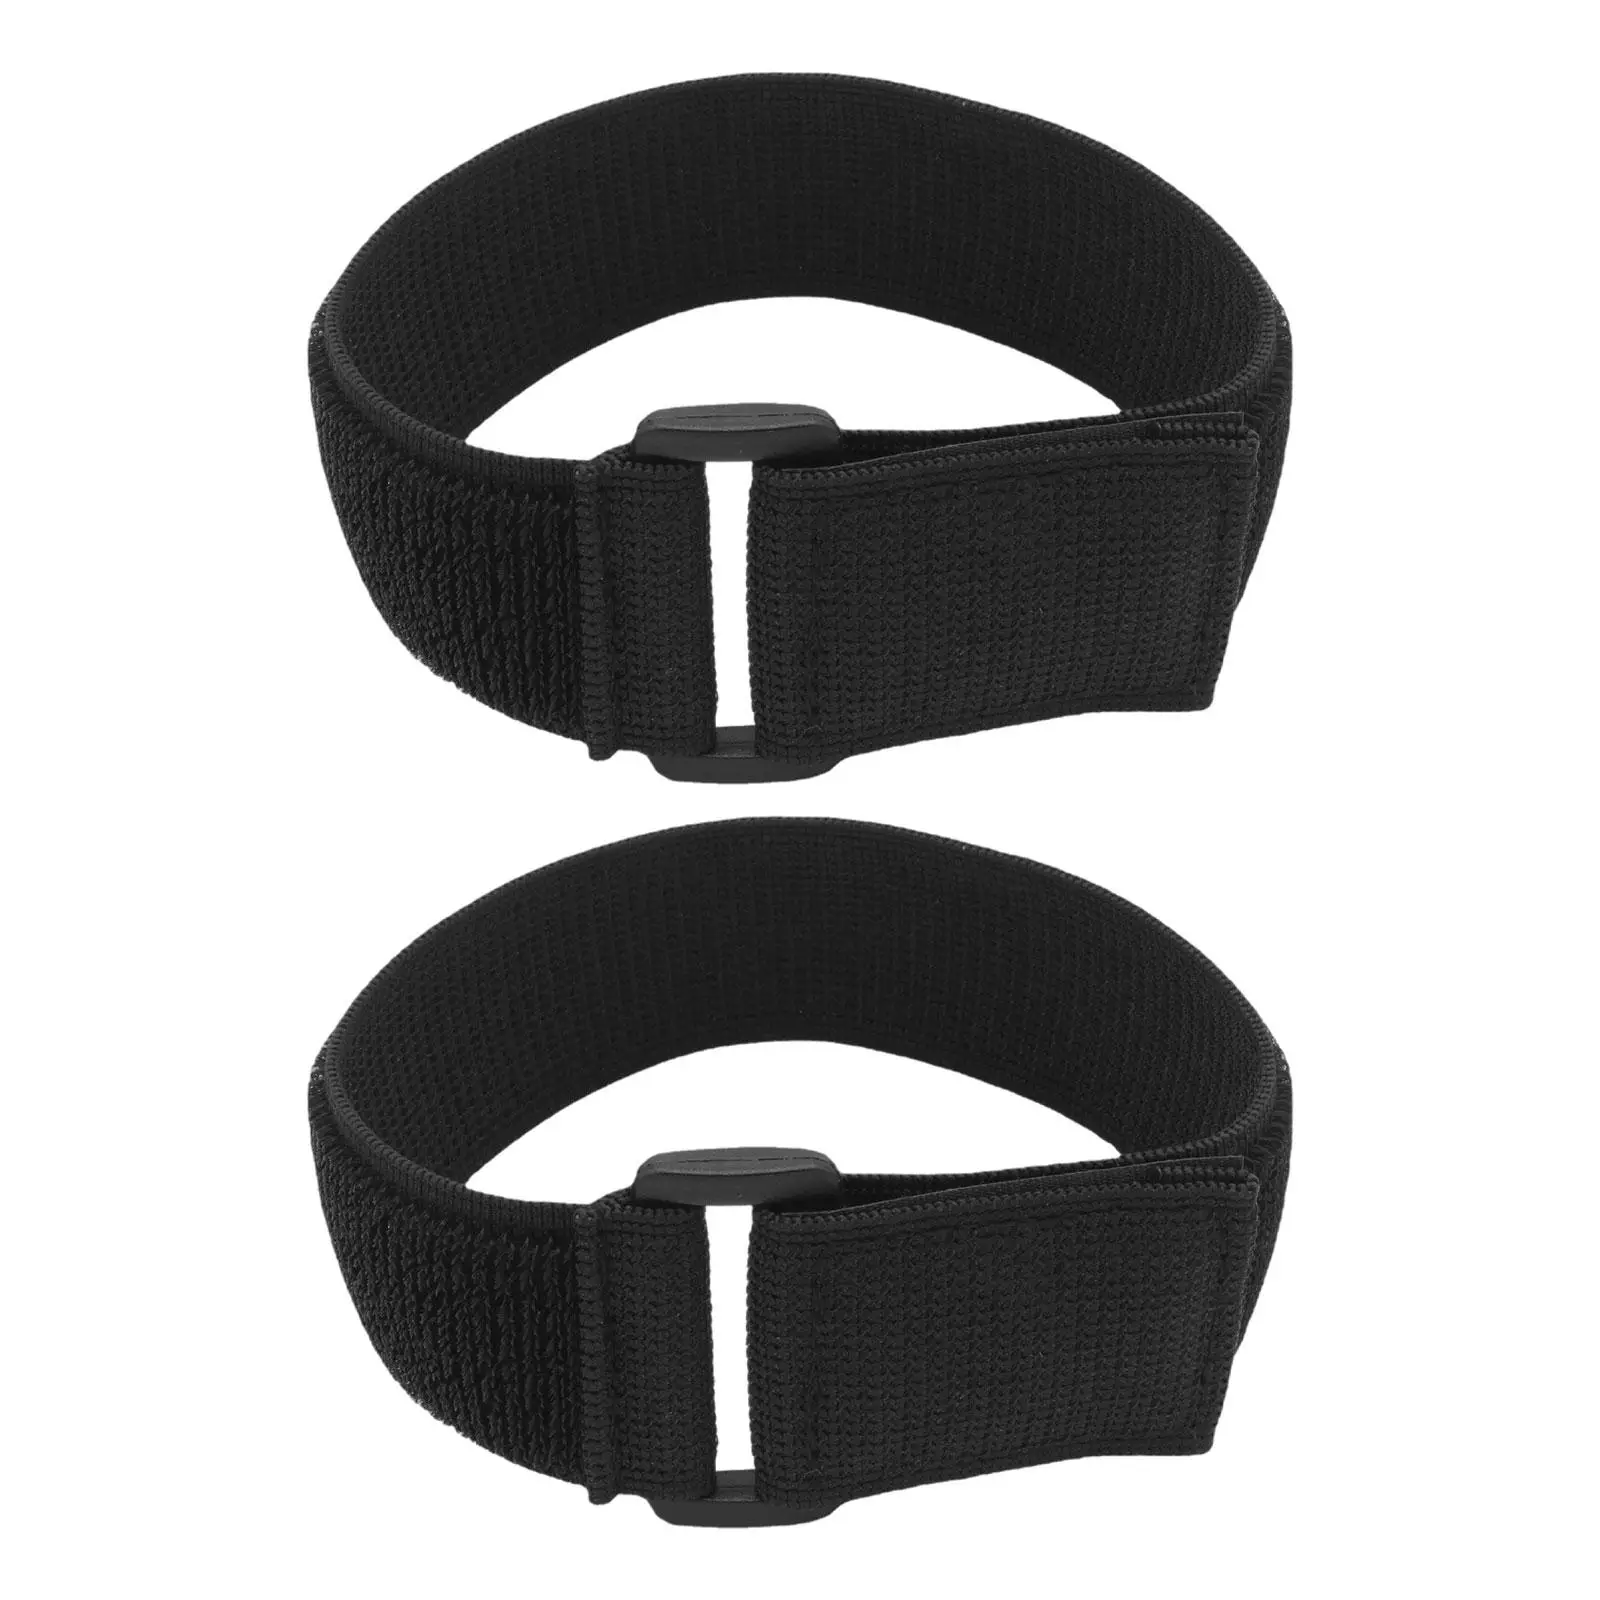 Elliptical Trainer Pedals Strap Elastic Band for Sports Fitness